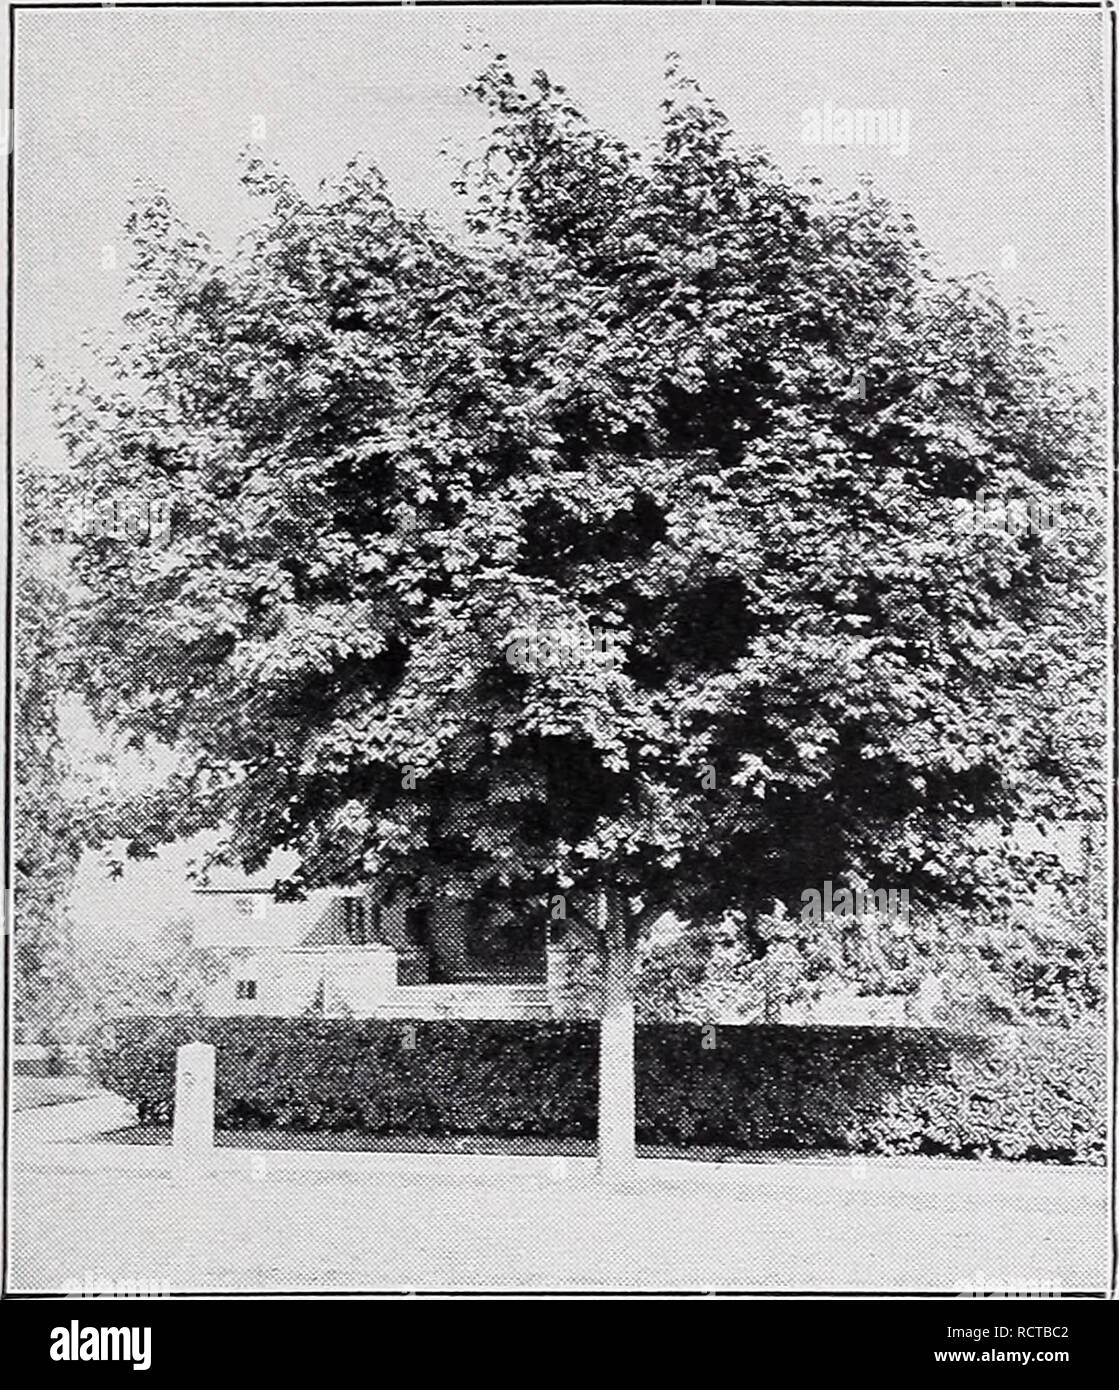 . Descriptive price list. Nurseries Horticulture Catalogs; Evergreens Catalogs; Fruit trees Catalogs; Shrubs Catalogs; Climbing plants Catalogs. C. M. HOBBS 3c SONS, INC., BRIDGEPORT, INDIANA. Ailanthus Acer Schwedleri. ACER—Continued. A. rubrum (Red Maple). Becomes a large tree. Leaves have five unequal lobes, green above, pale or bluish beneath, turning to bright scarlet in the fall ; flowers red or scarlet, fruits red. Valuable for park or street plant- ing. Does well in wet locations. Each 6 to 8 ft $2.00 8 to 10 ft 3.00 A. saccharum (Sugar or Rock Maple). This is one of the most desirable Stock Photo